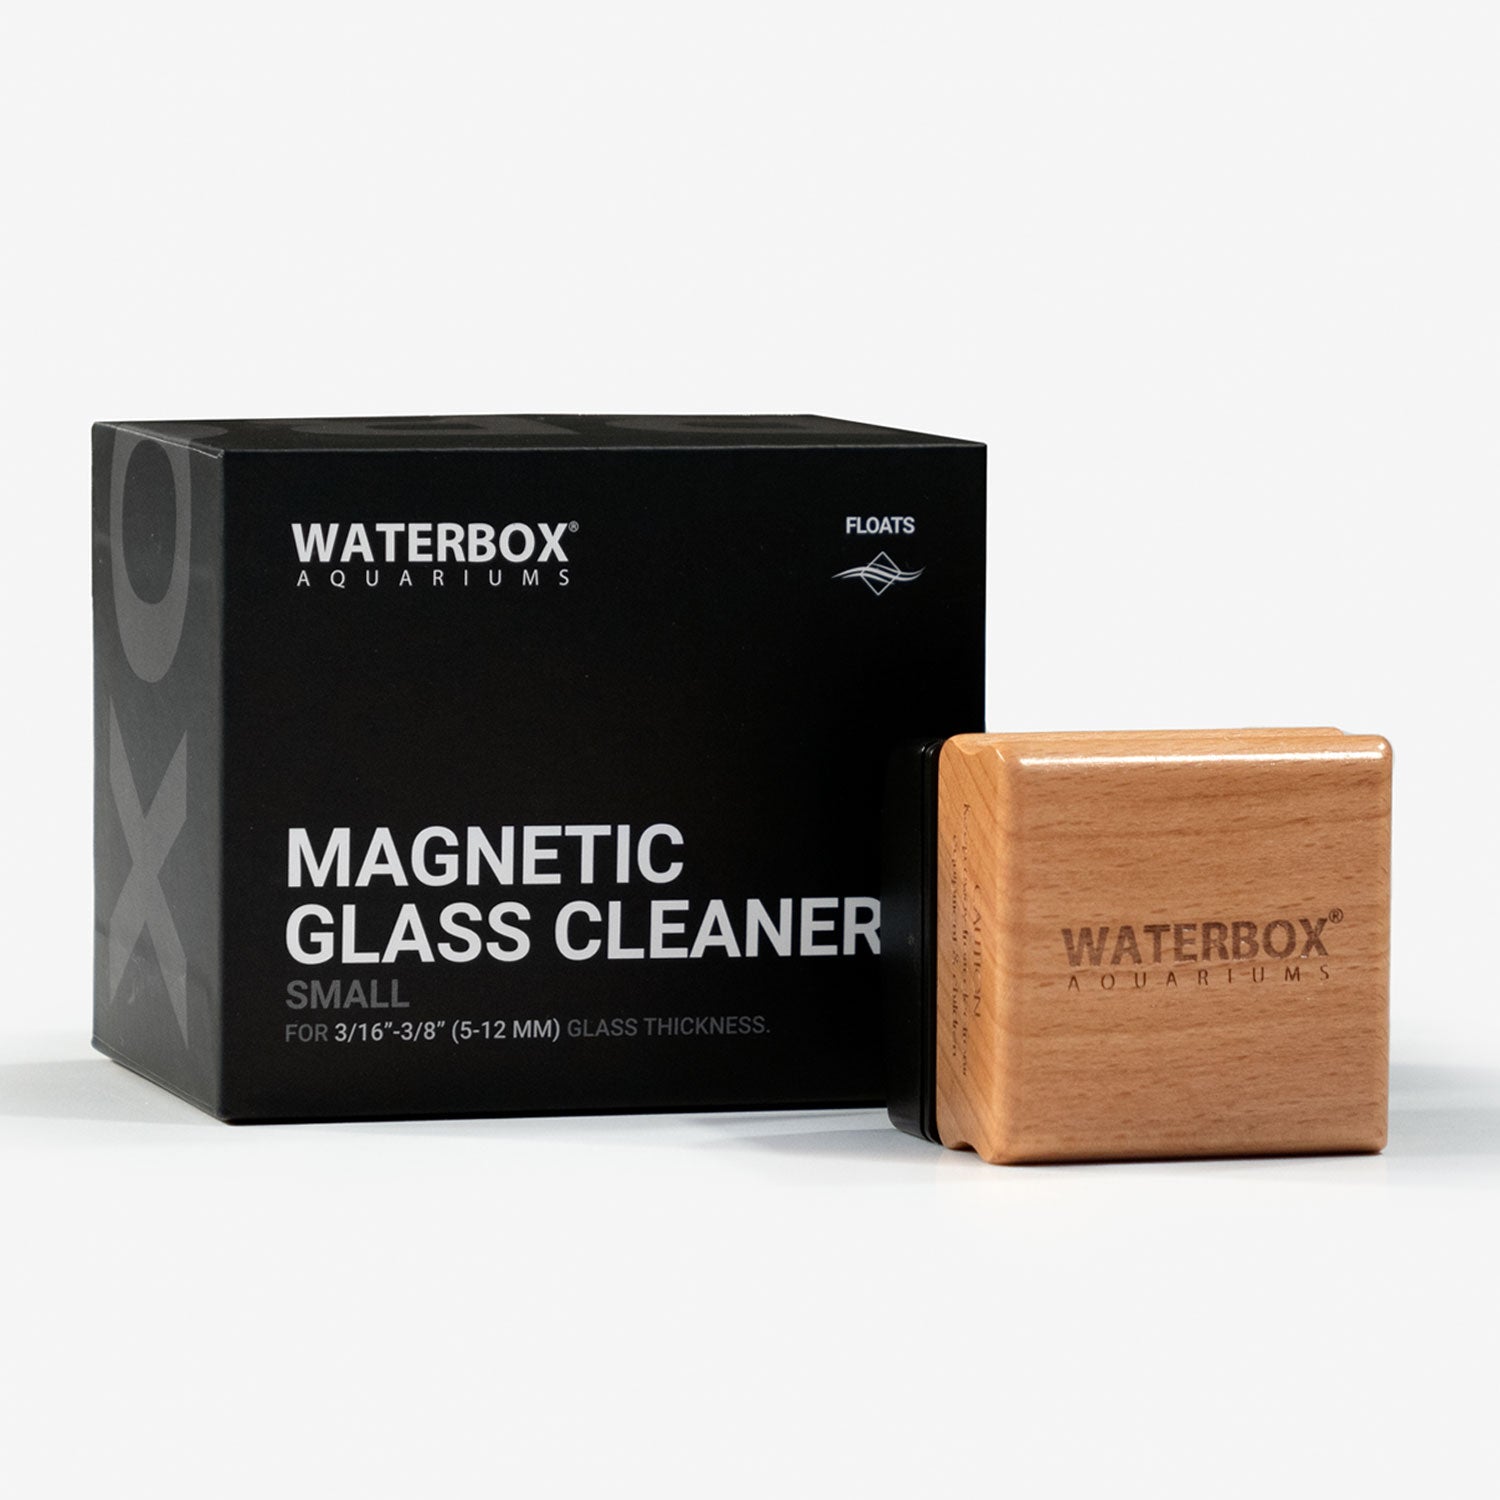 Waterbox Magnetic Glass Cleaner Large